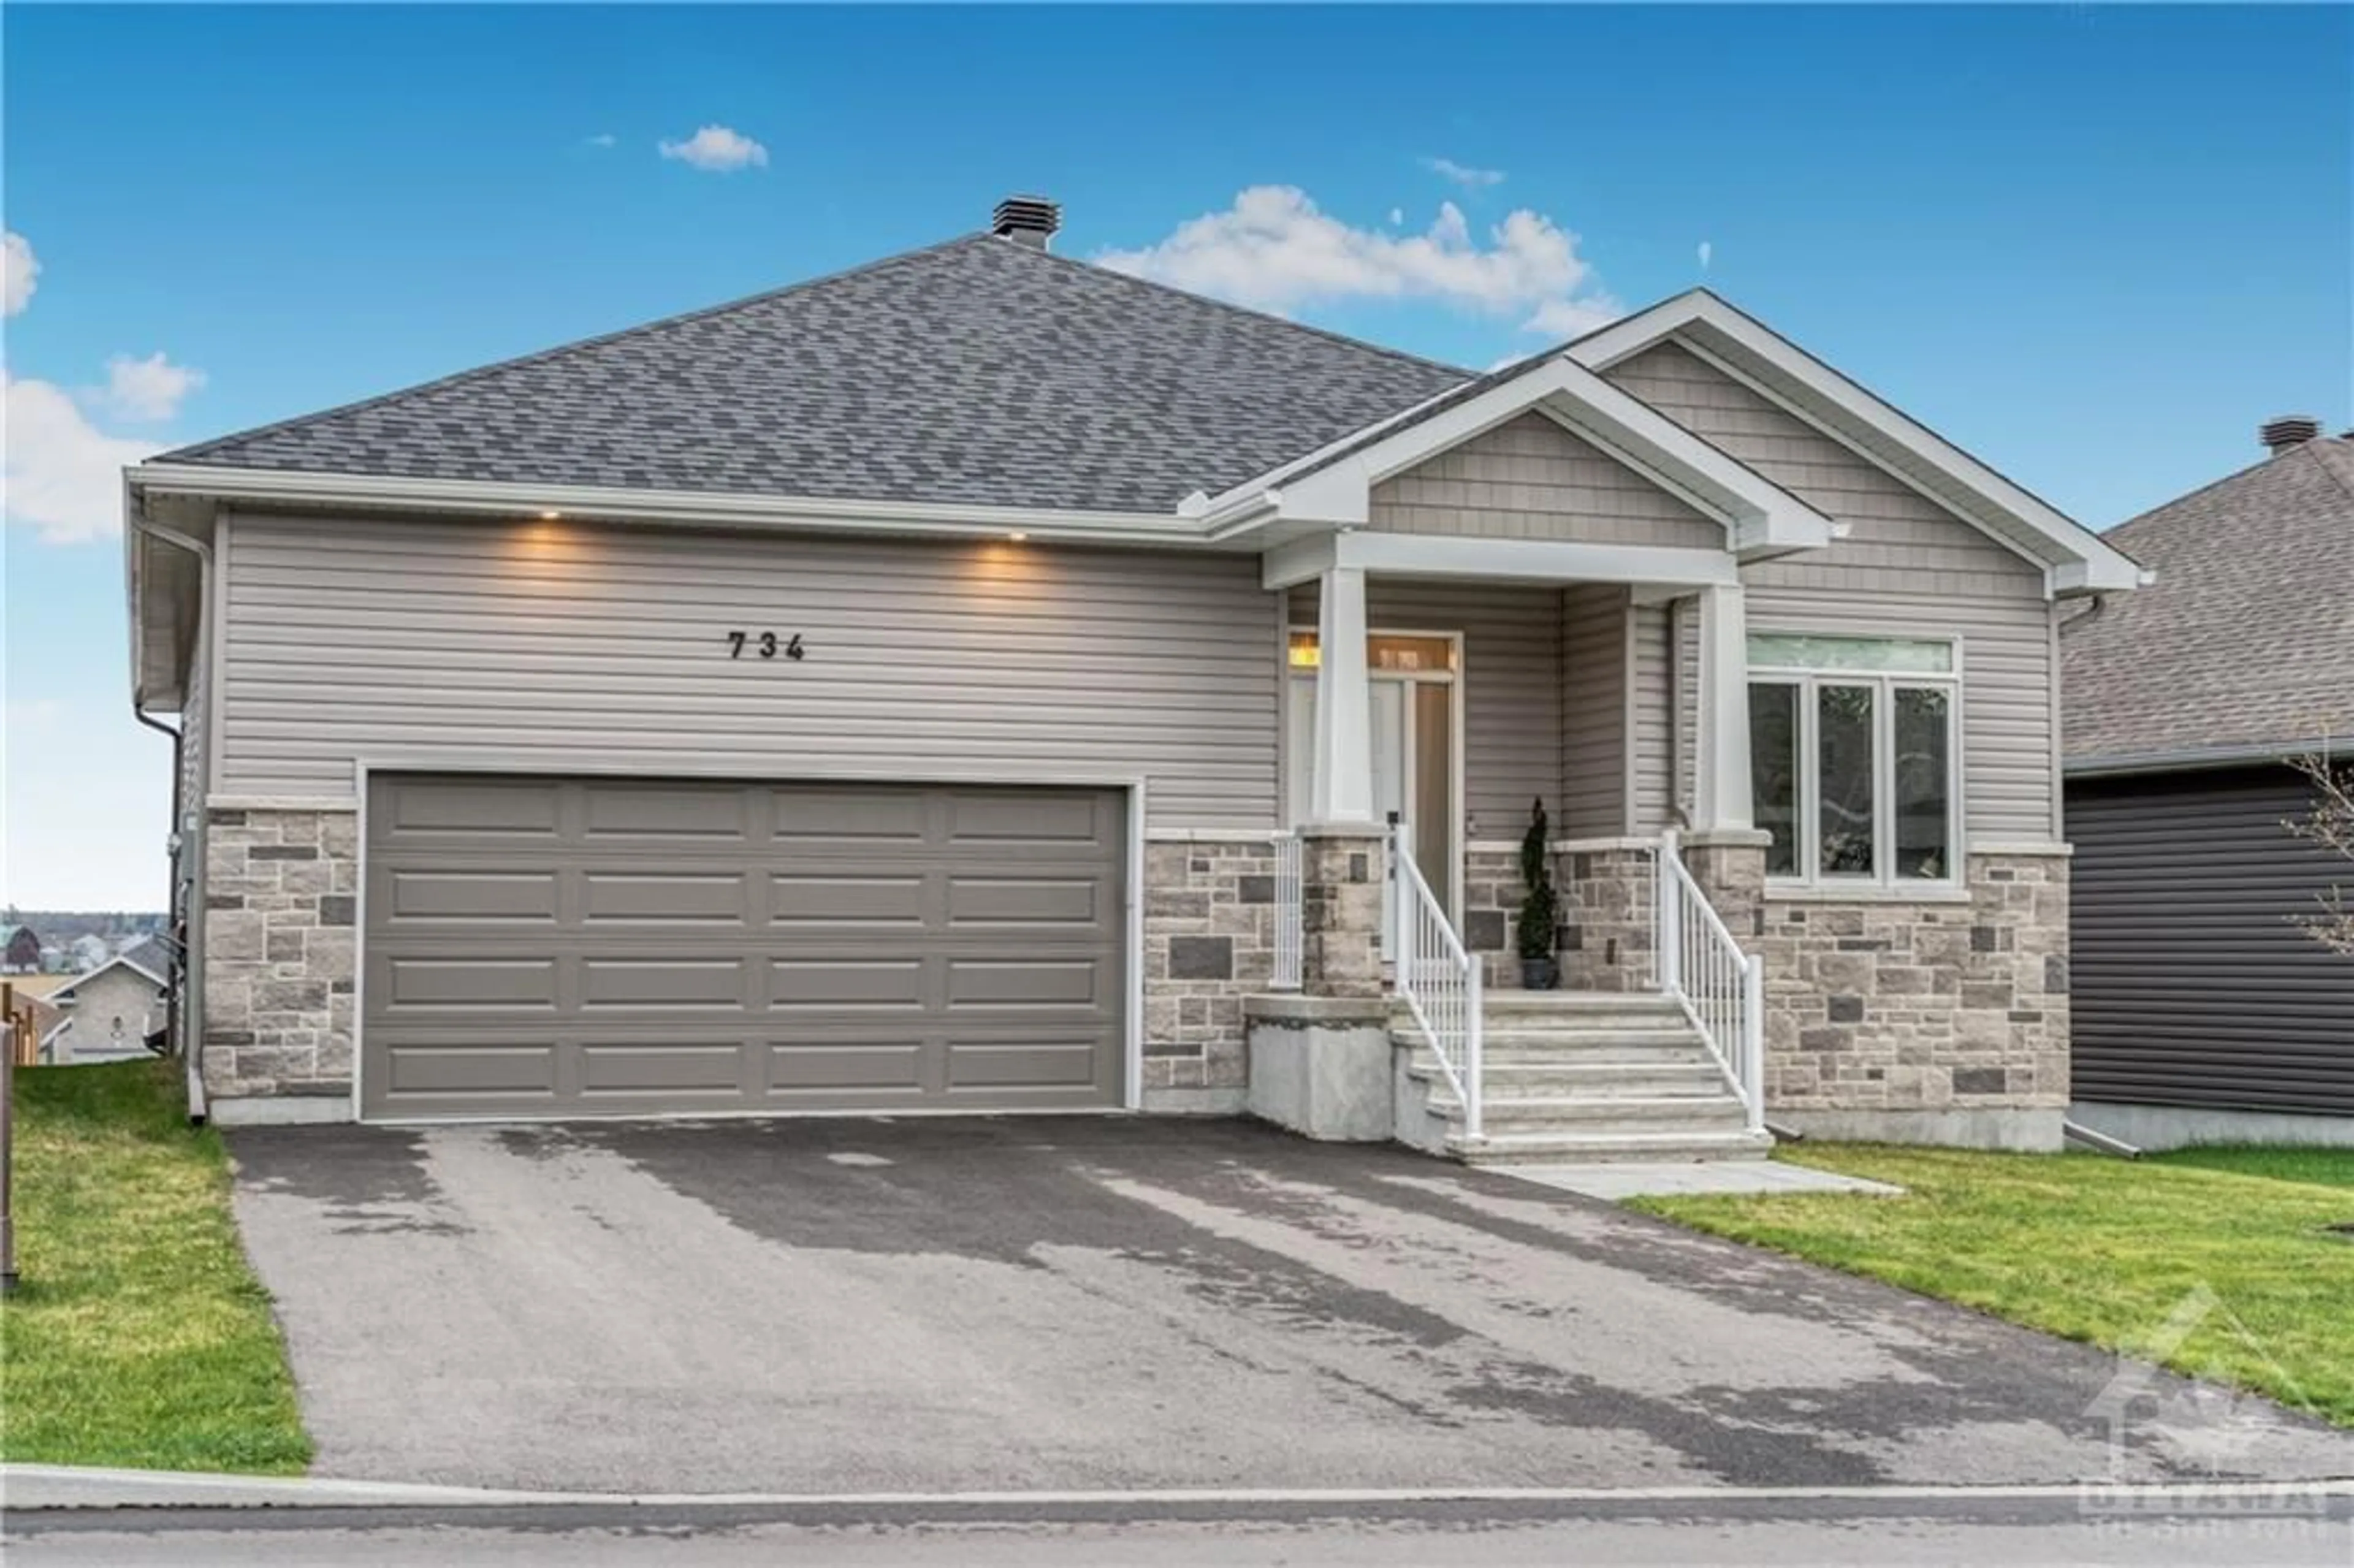 Frontside or backside of a home for 734 MEADOWRIDGE Cir, Ottawa Ontario K0A 1L0